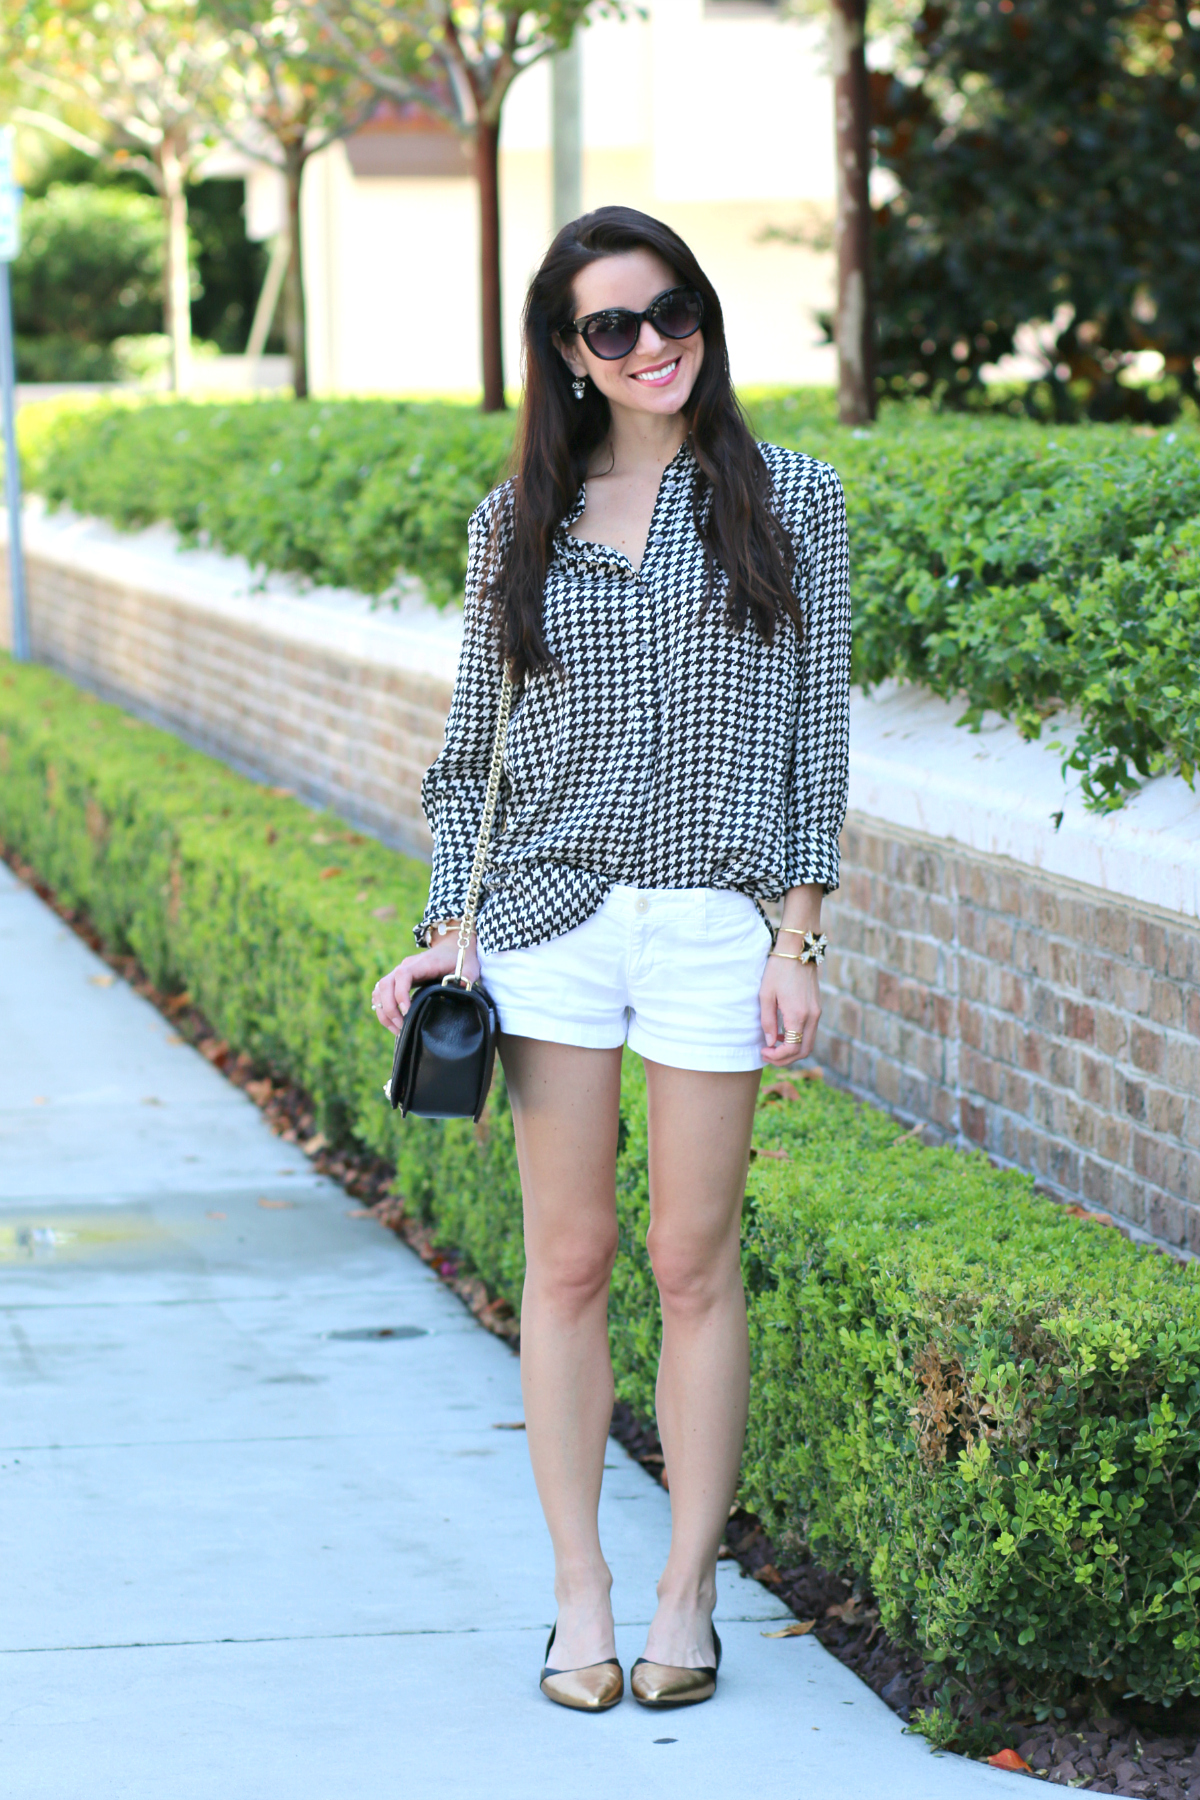 Ralph Lauren houndstooth blouse with white shorts and gold-dipped Rockport flats